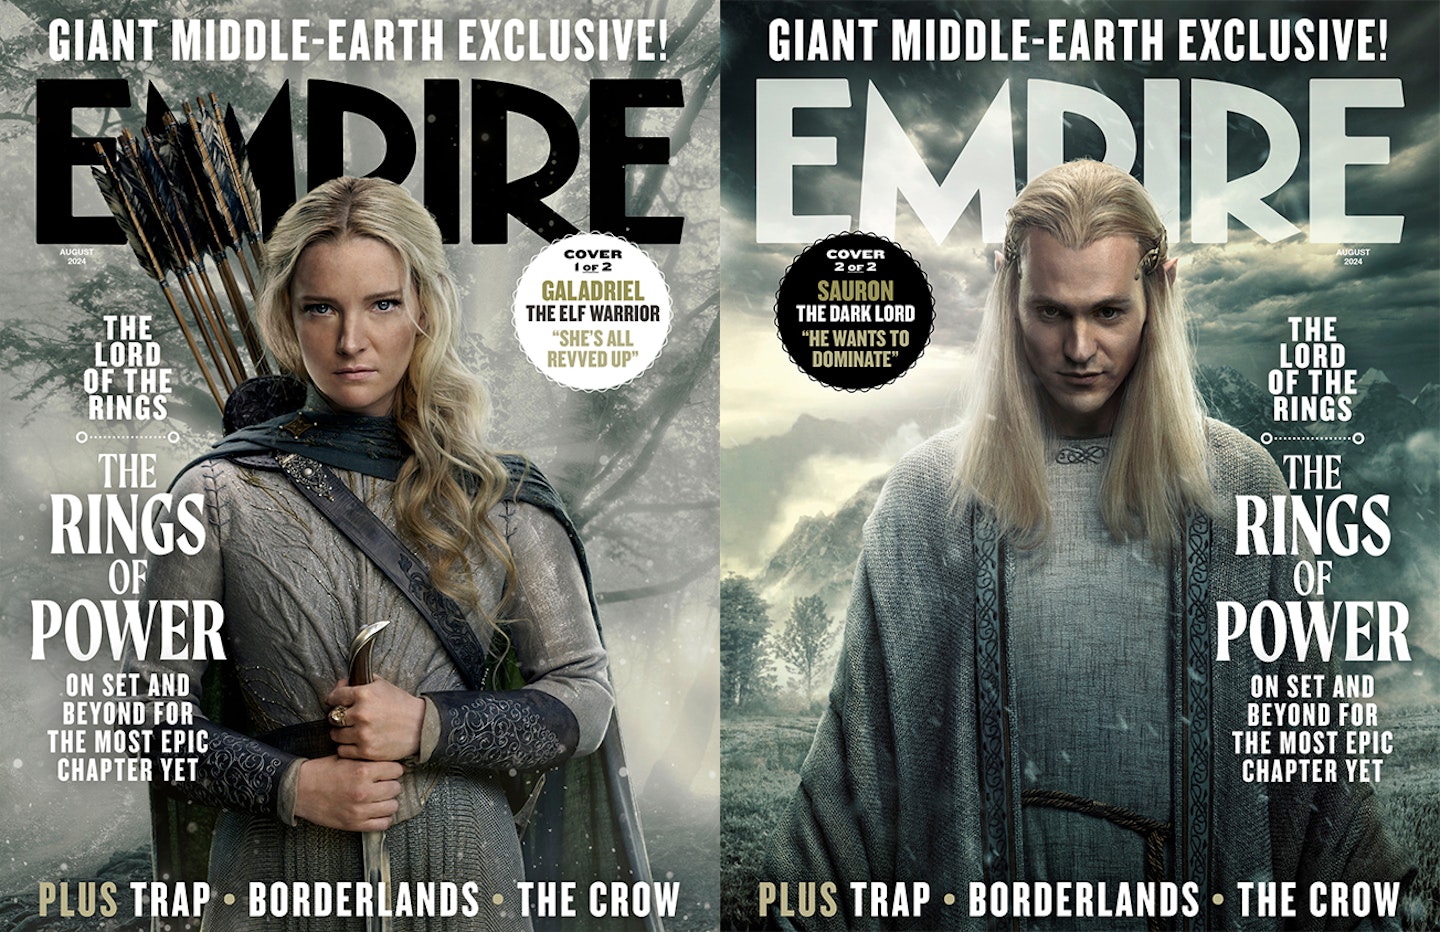 The Lord Of The Rings: The Rings Of Power Season 2 – Empire covers